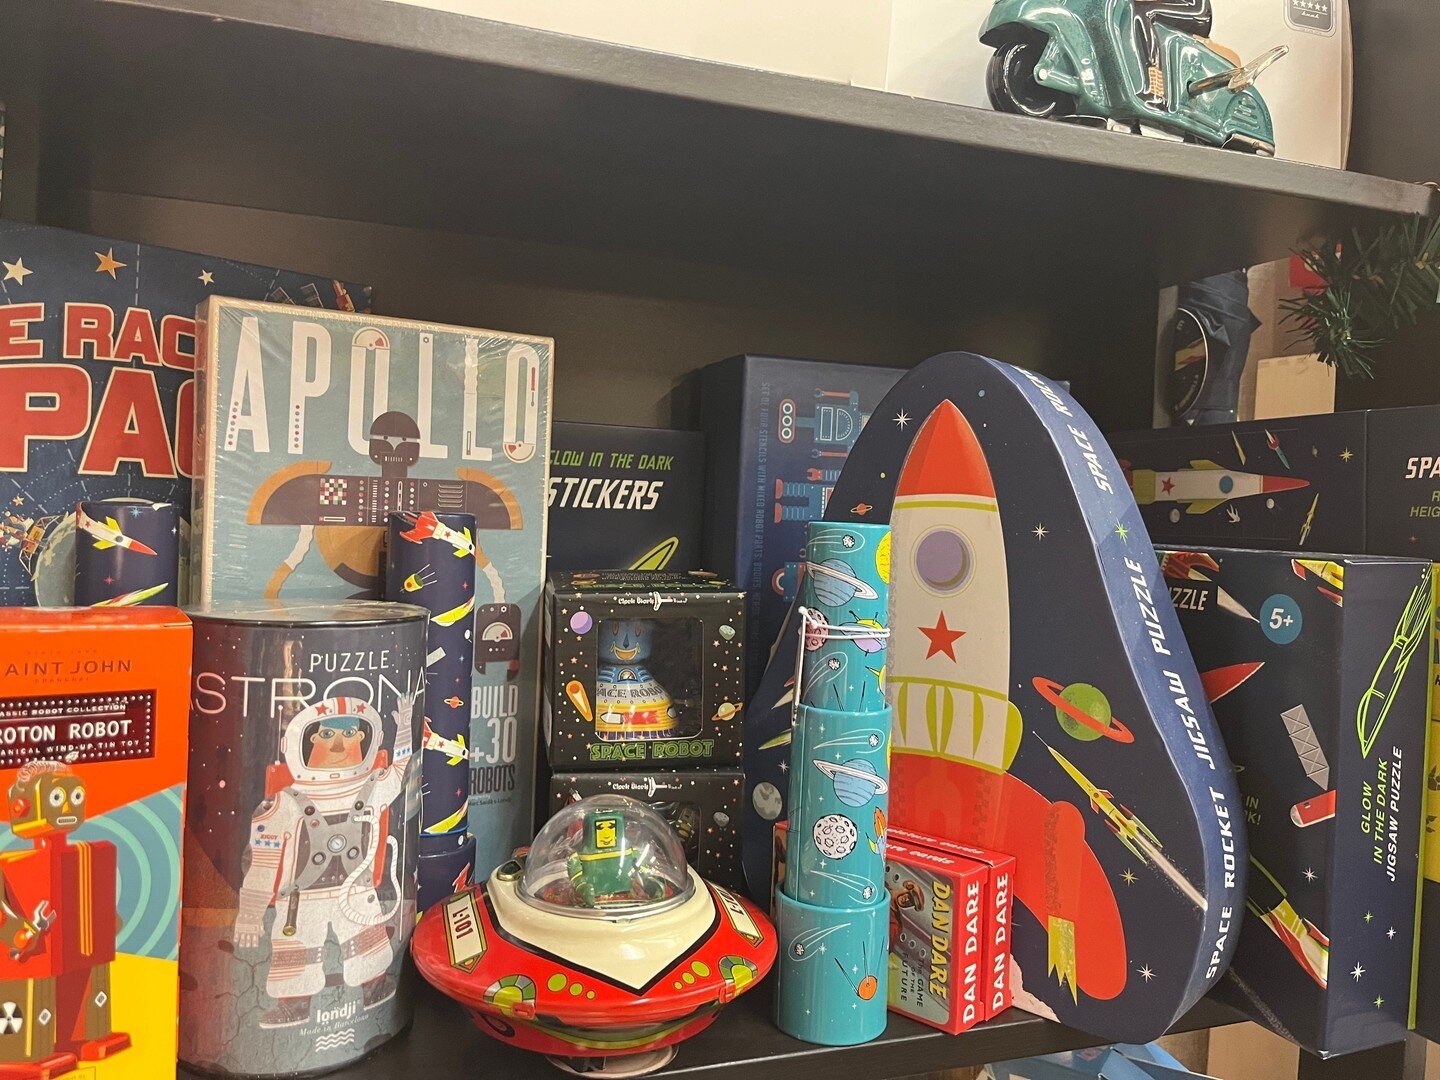 🚀✨ Calling all aspiring astronauts and stargazers! Embark on an intergalactic adventure with space toys that are out of this world, waiting for you at The Vintage Toy Box! 🌌🎁

For the cosmic dreamers and future space explorers, our collection has 